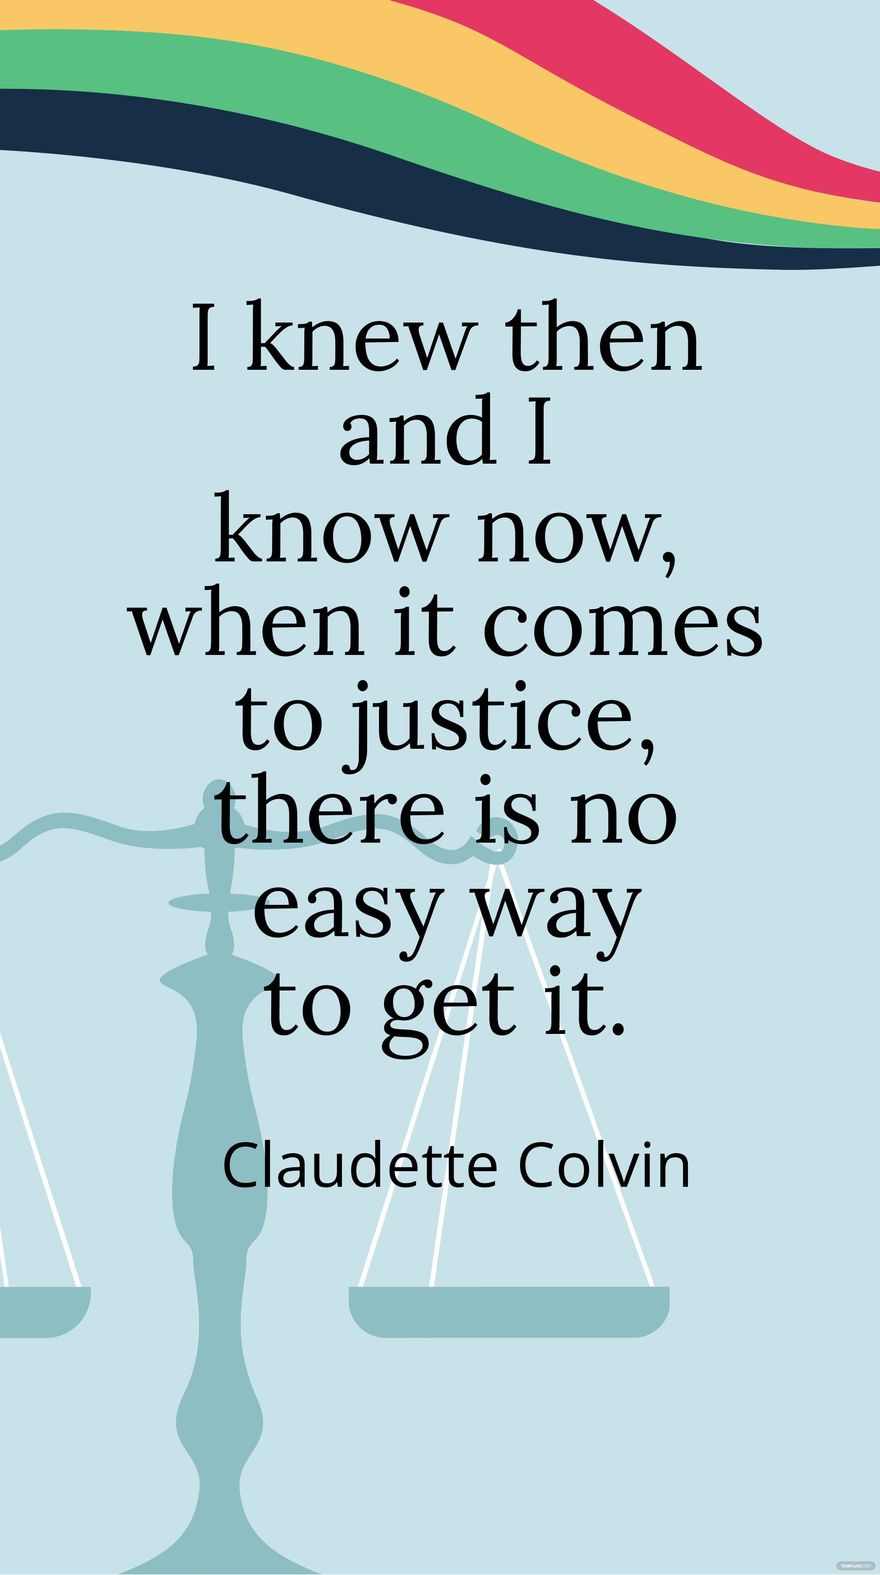 Free Claudette Colvin - I knew then and I know now, when it comes to justice, there is no easy way to get it.